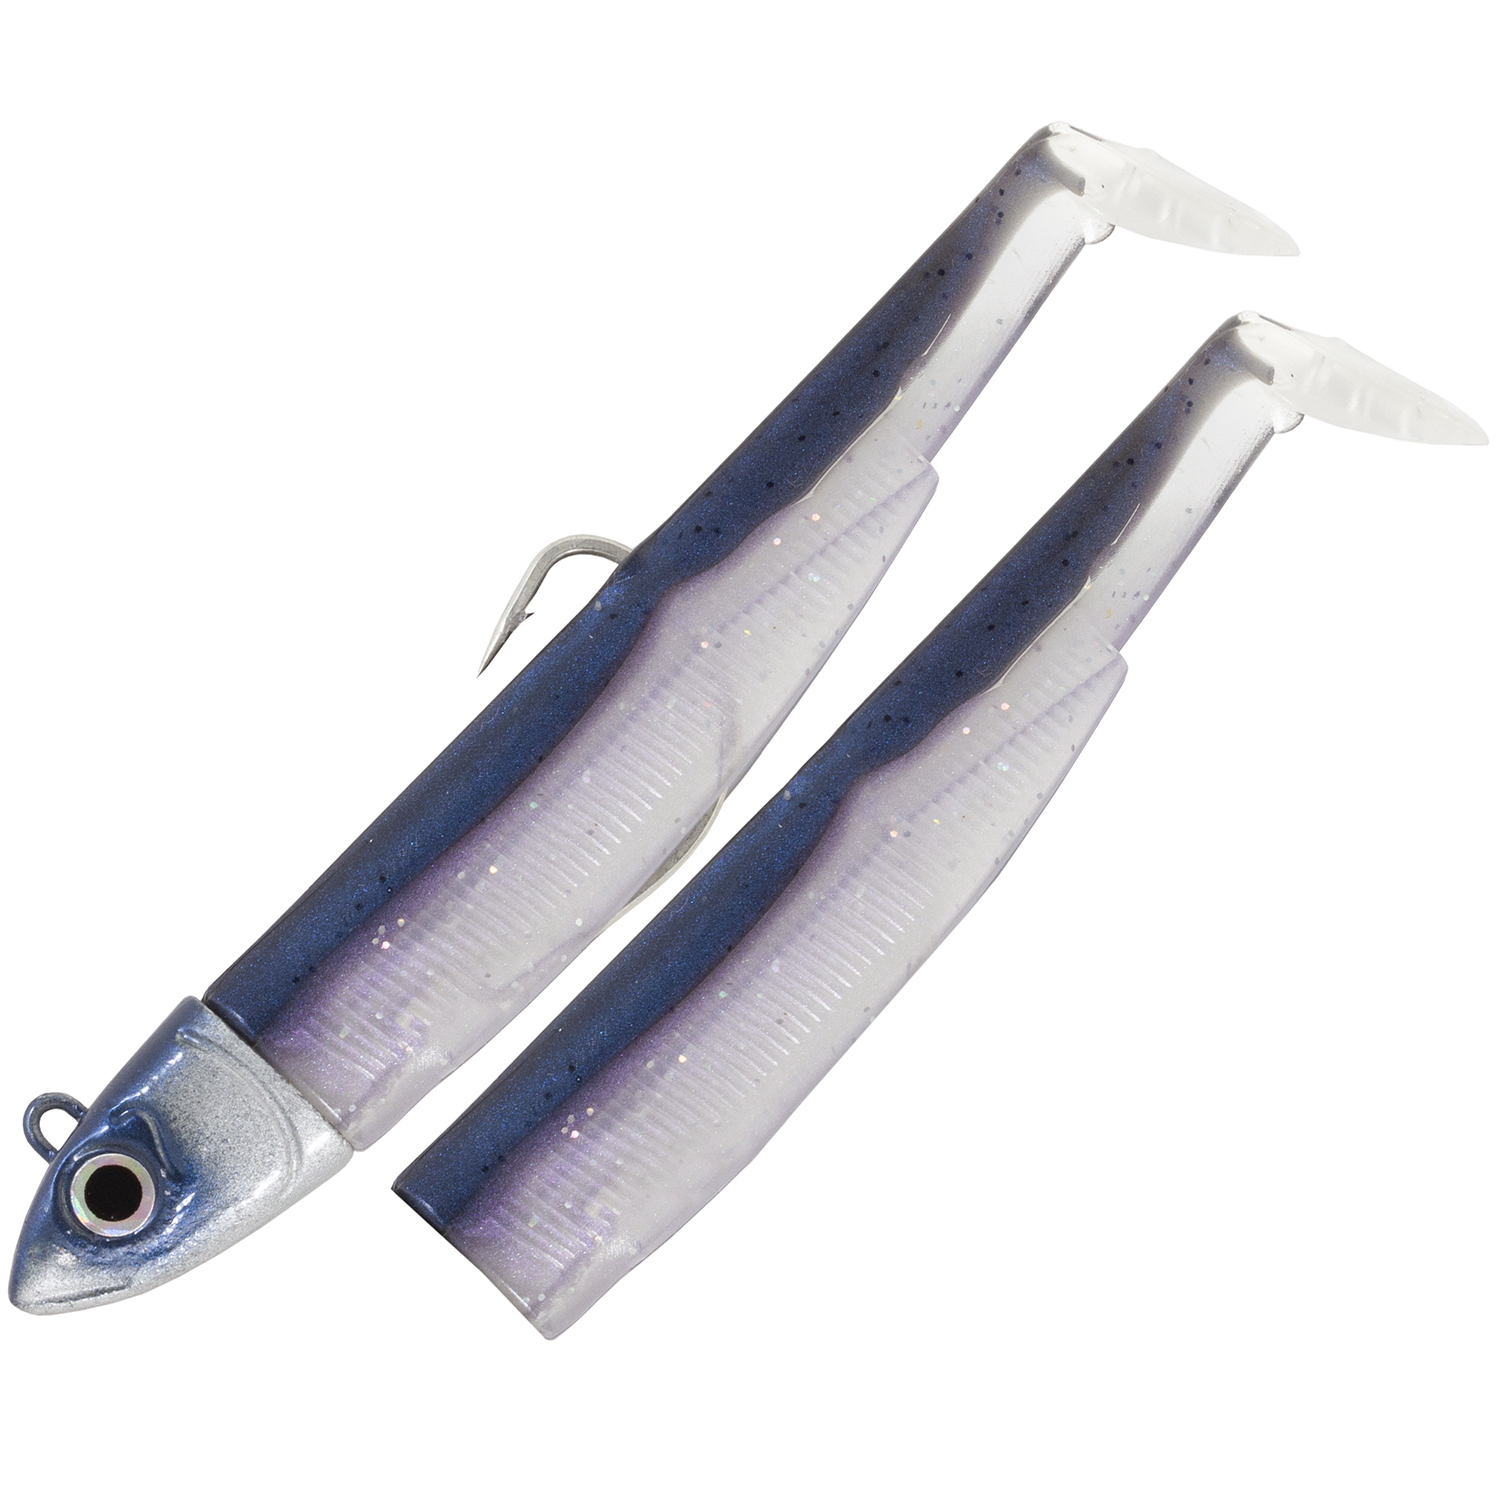 FIIISH BLACK MINNOW 90 COMBO SEARCH 8G. Fishing Shopping - The portal for  fishing tailored for you